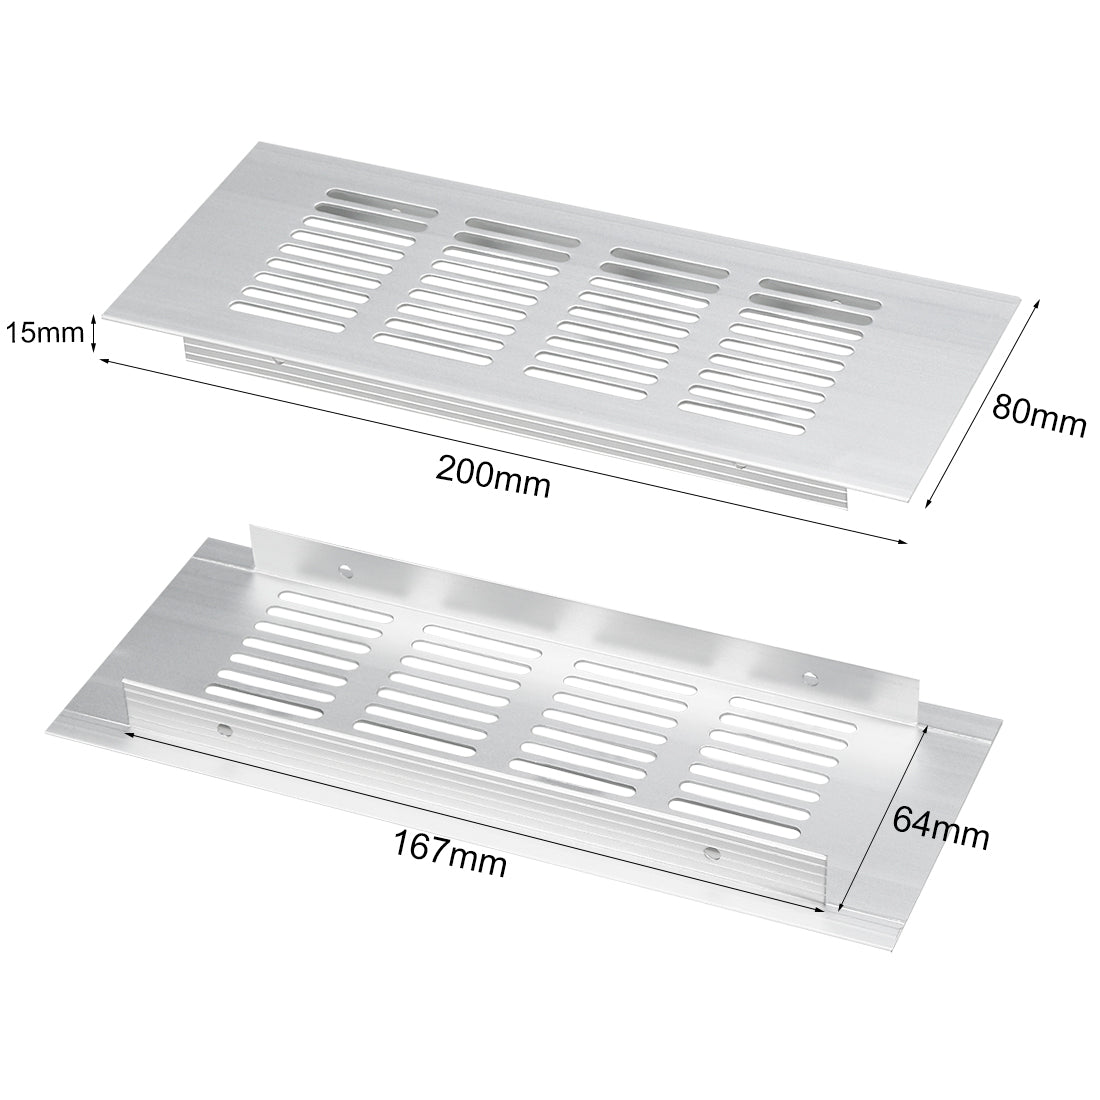 uxcell Uxcell 200mmx80mm, Ventilation Grille, Aluminum Alloy Air Vent Louvered Grill Cover 2pcs